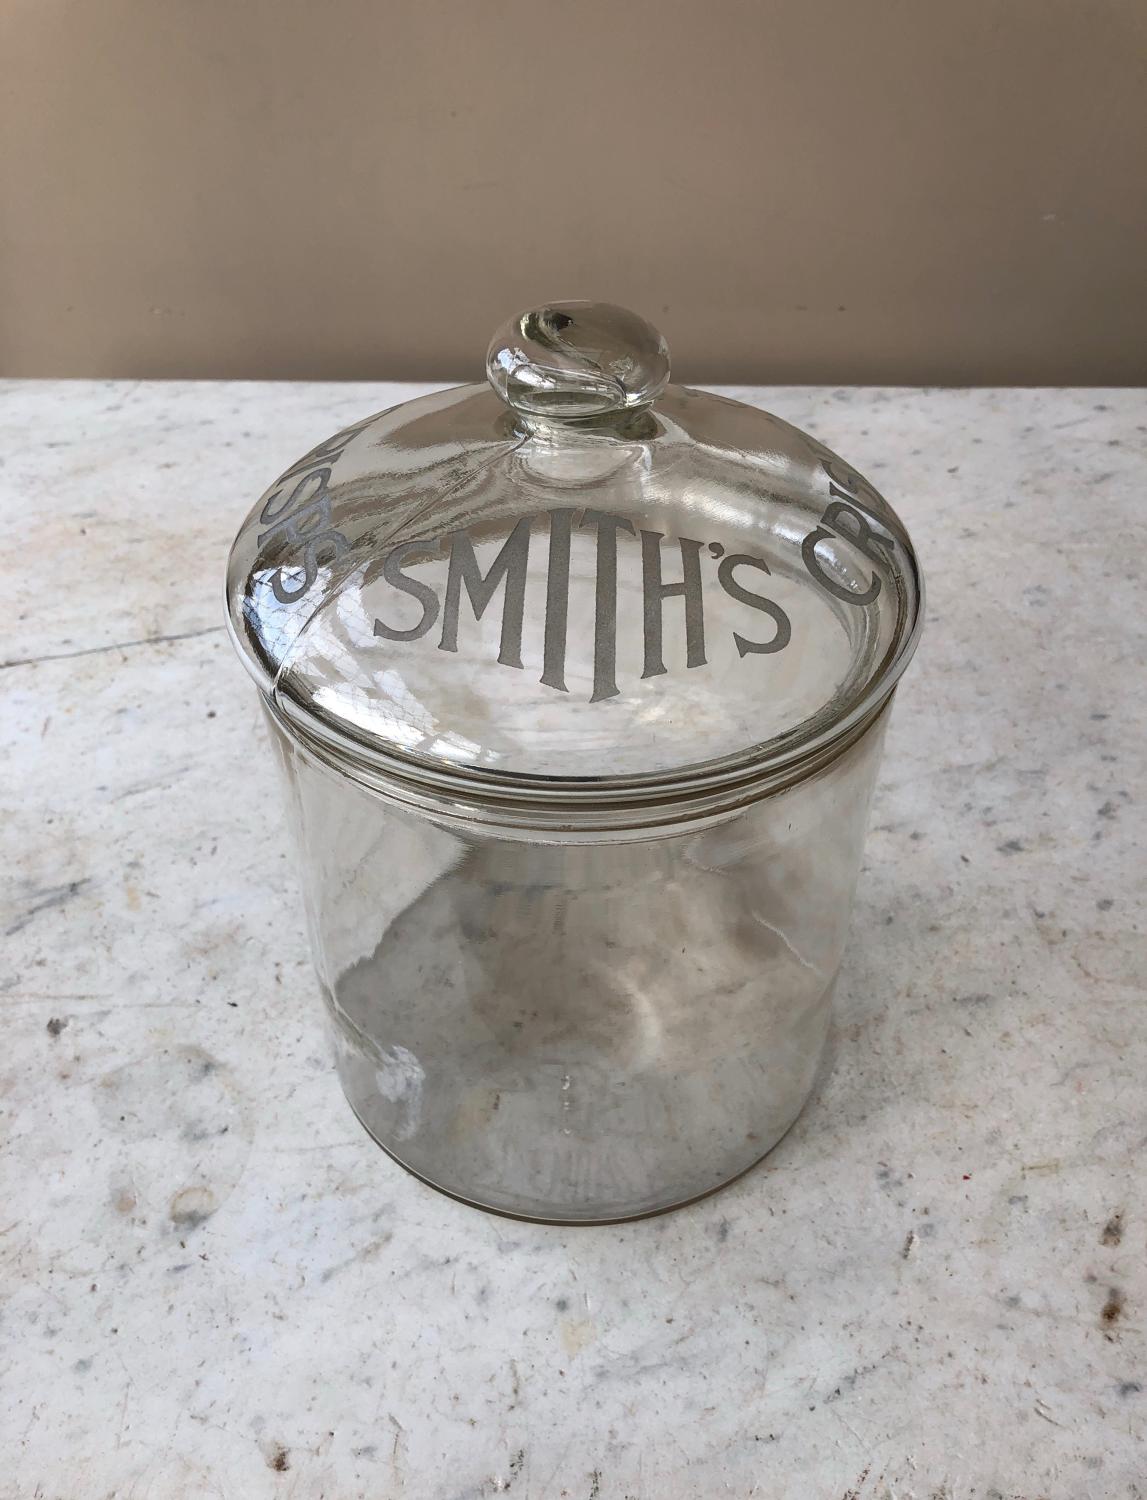 Early 20th Century Shops Counter Smiths Crisps Advertising Jar